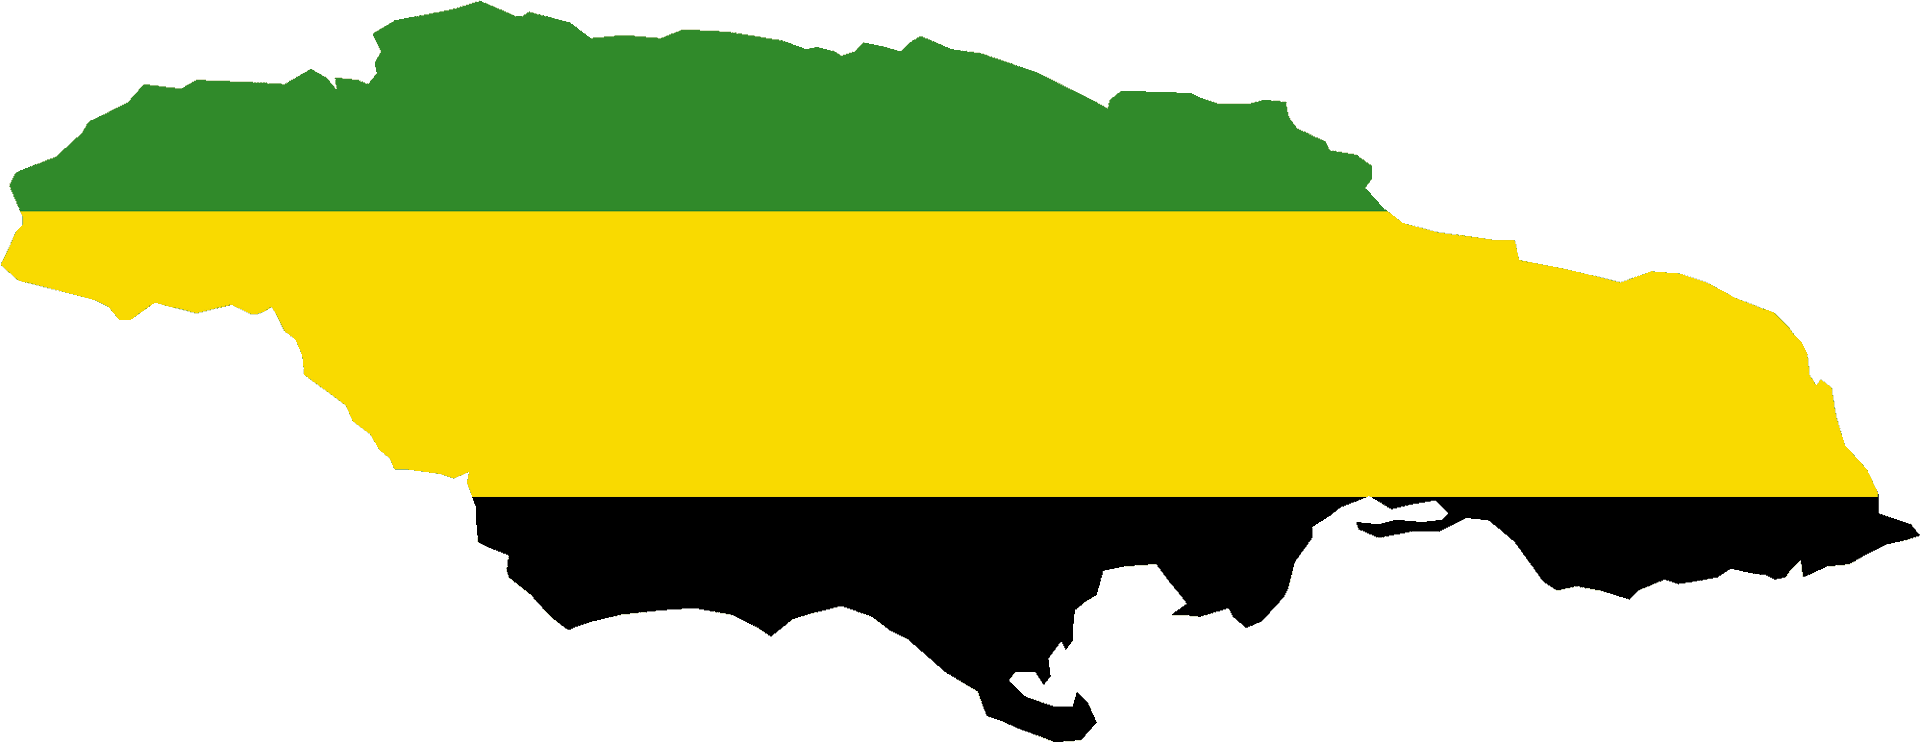 Jamaica Map Silhouette Green Yellow Black PNG image